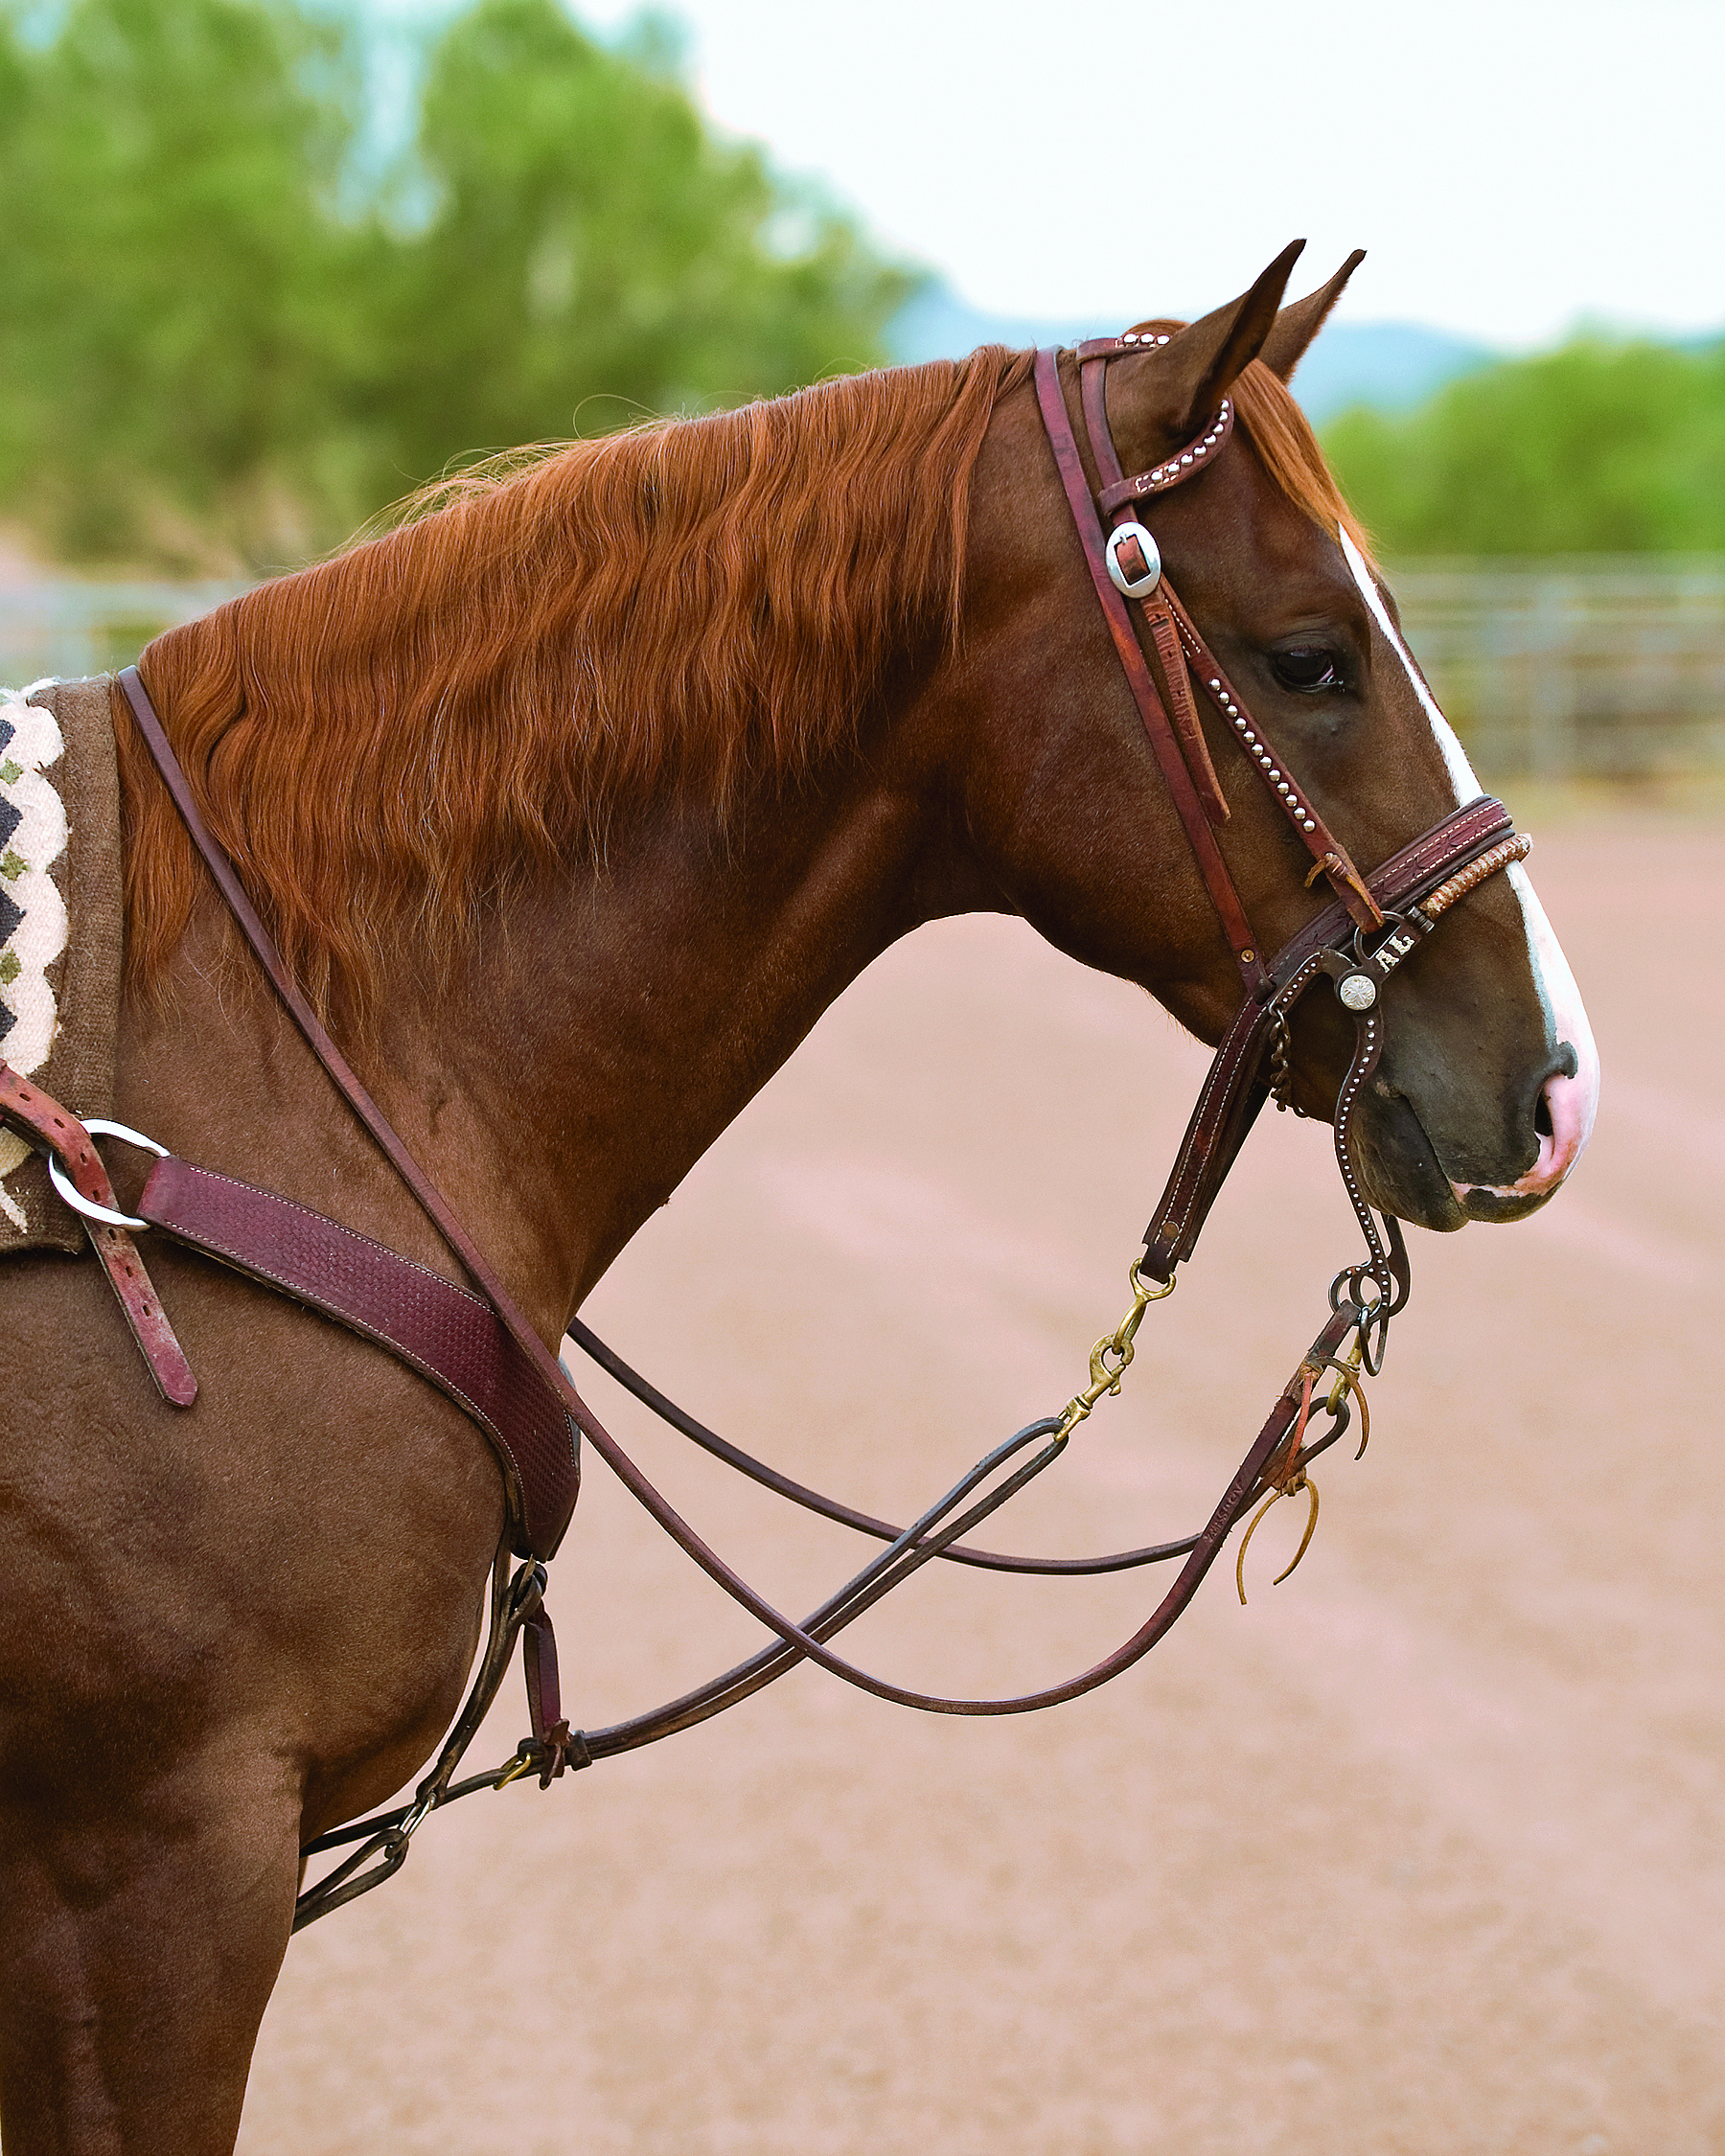 7 Commonly Used Western Tack Pieces: Gimmicks or Good Gear?